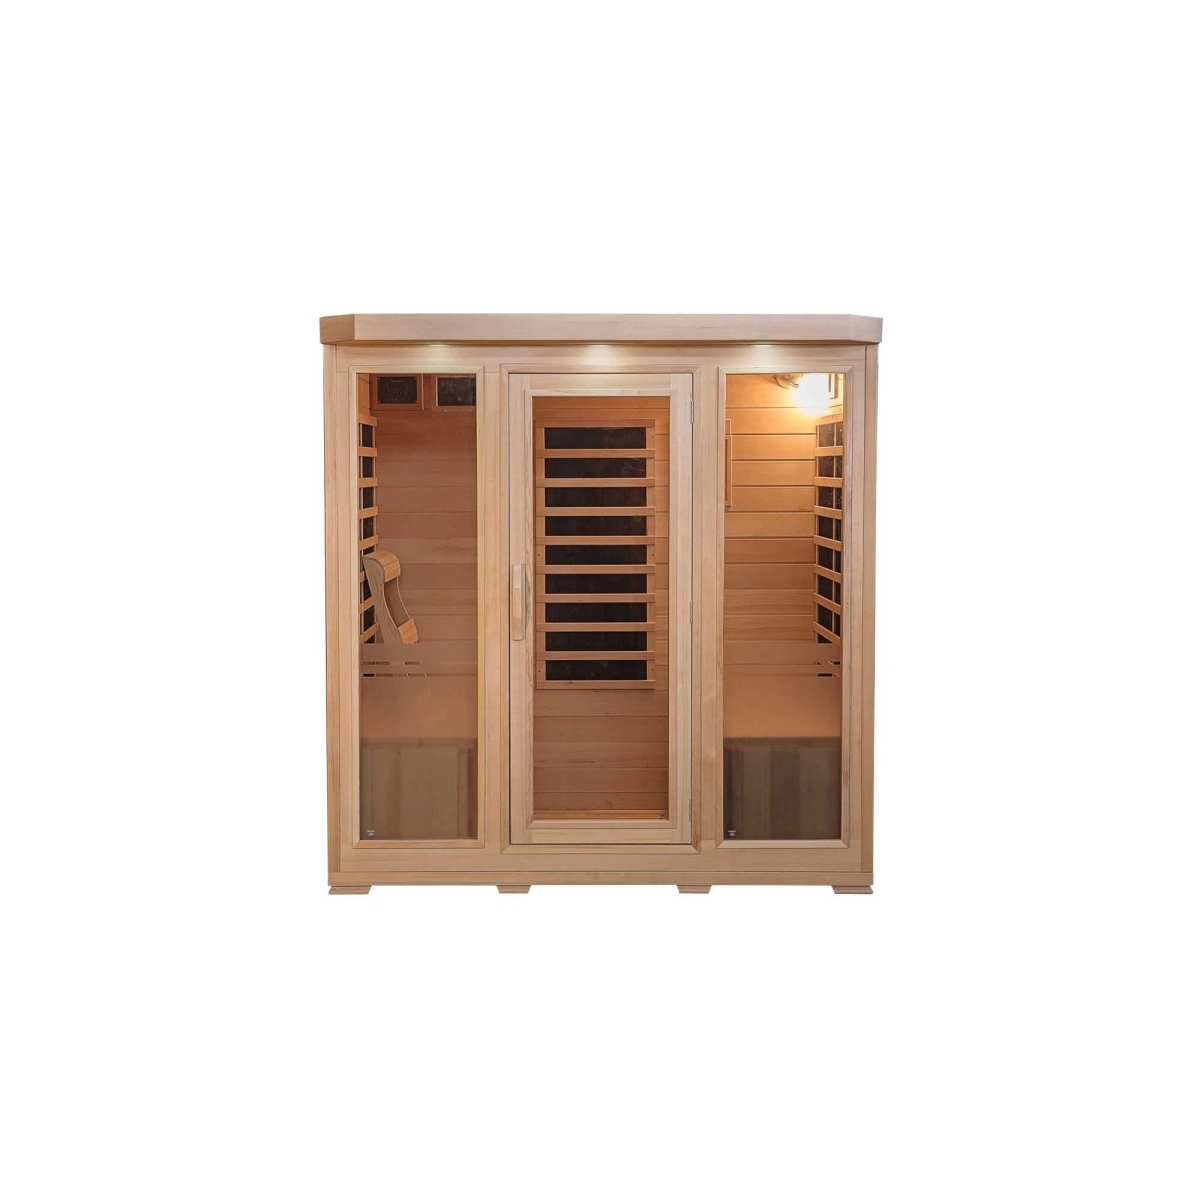 UPC 672875000098 product image for SA7020 Sonoma 4-Person Hemlock Infrared Sauna with 9 Carbon Heaters, Natural | upcitemdb.com